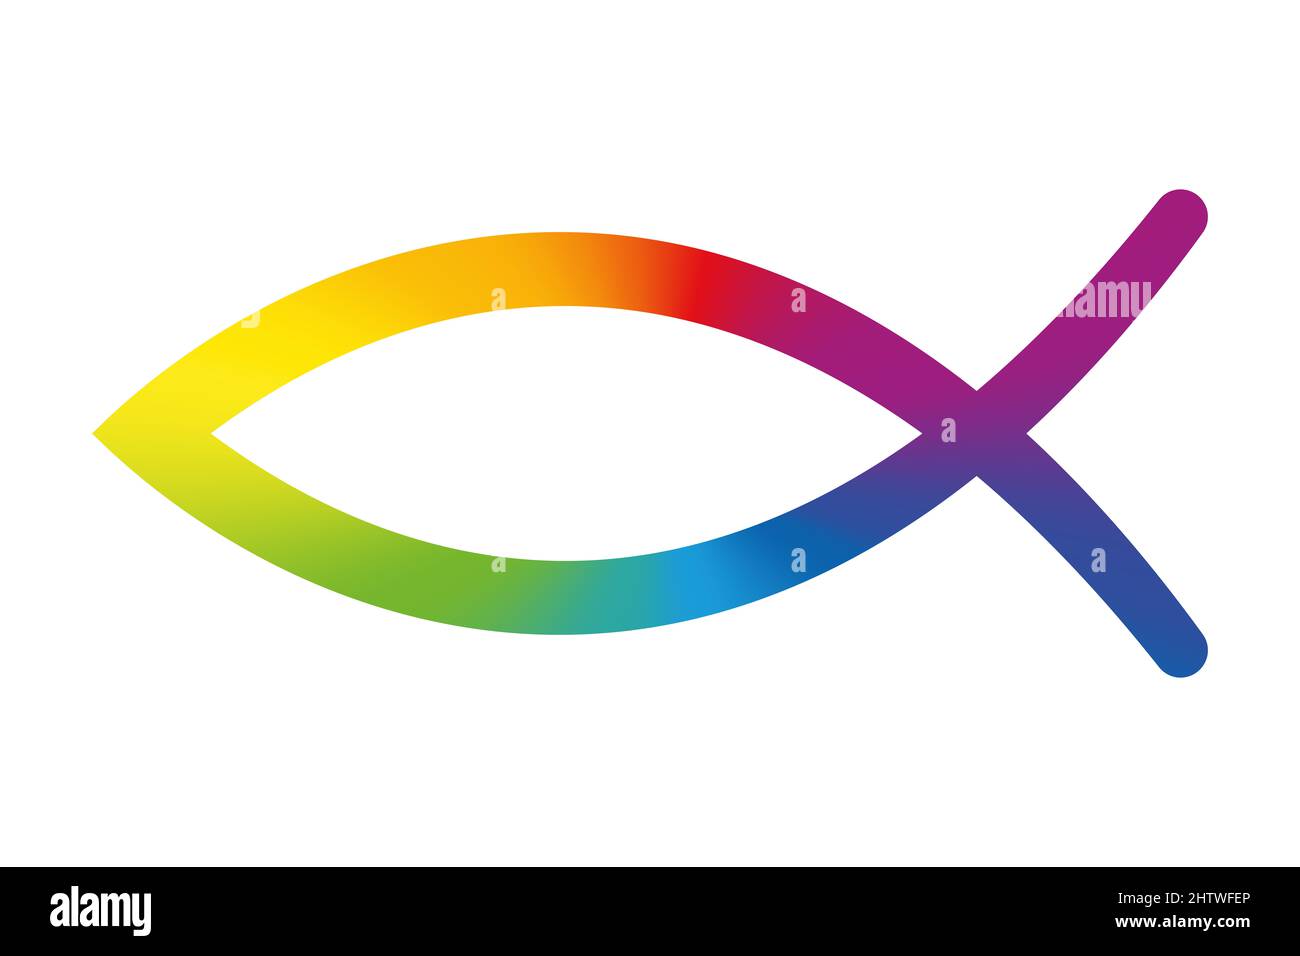 Rainbow colored sign of the fish symbol. Jesus fish, symbol of Christian art, consisting of 2 intersecting arcs, also called ichthys or ichthus. Stock Photo